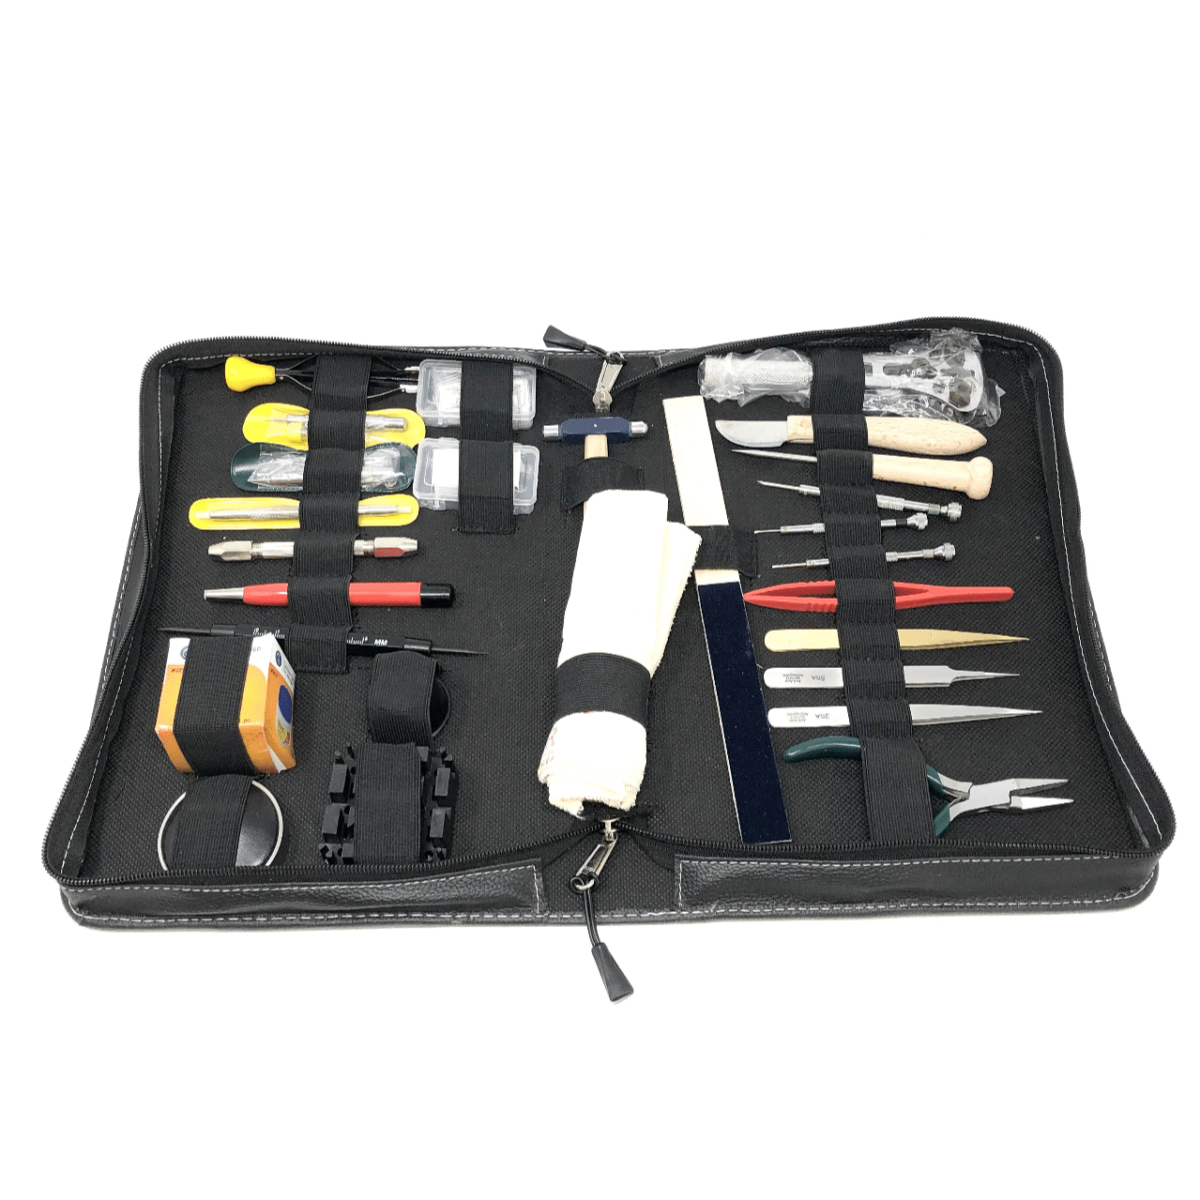 Watchmakers Tool Kit Watch Servicing Repairs Battery Replacement 27pcs in Pouch 194343224056 7 - Maddisons UK